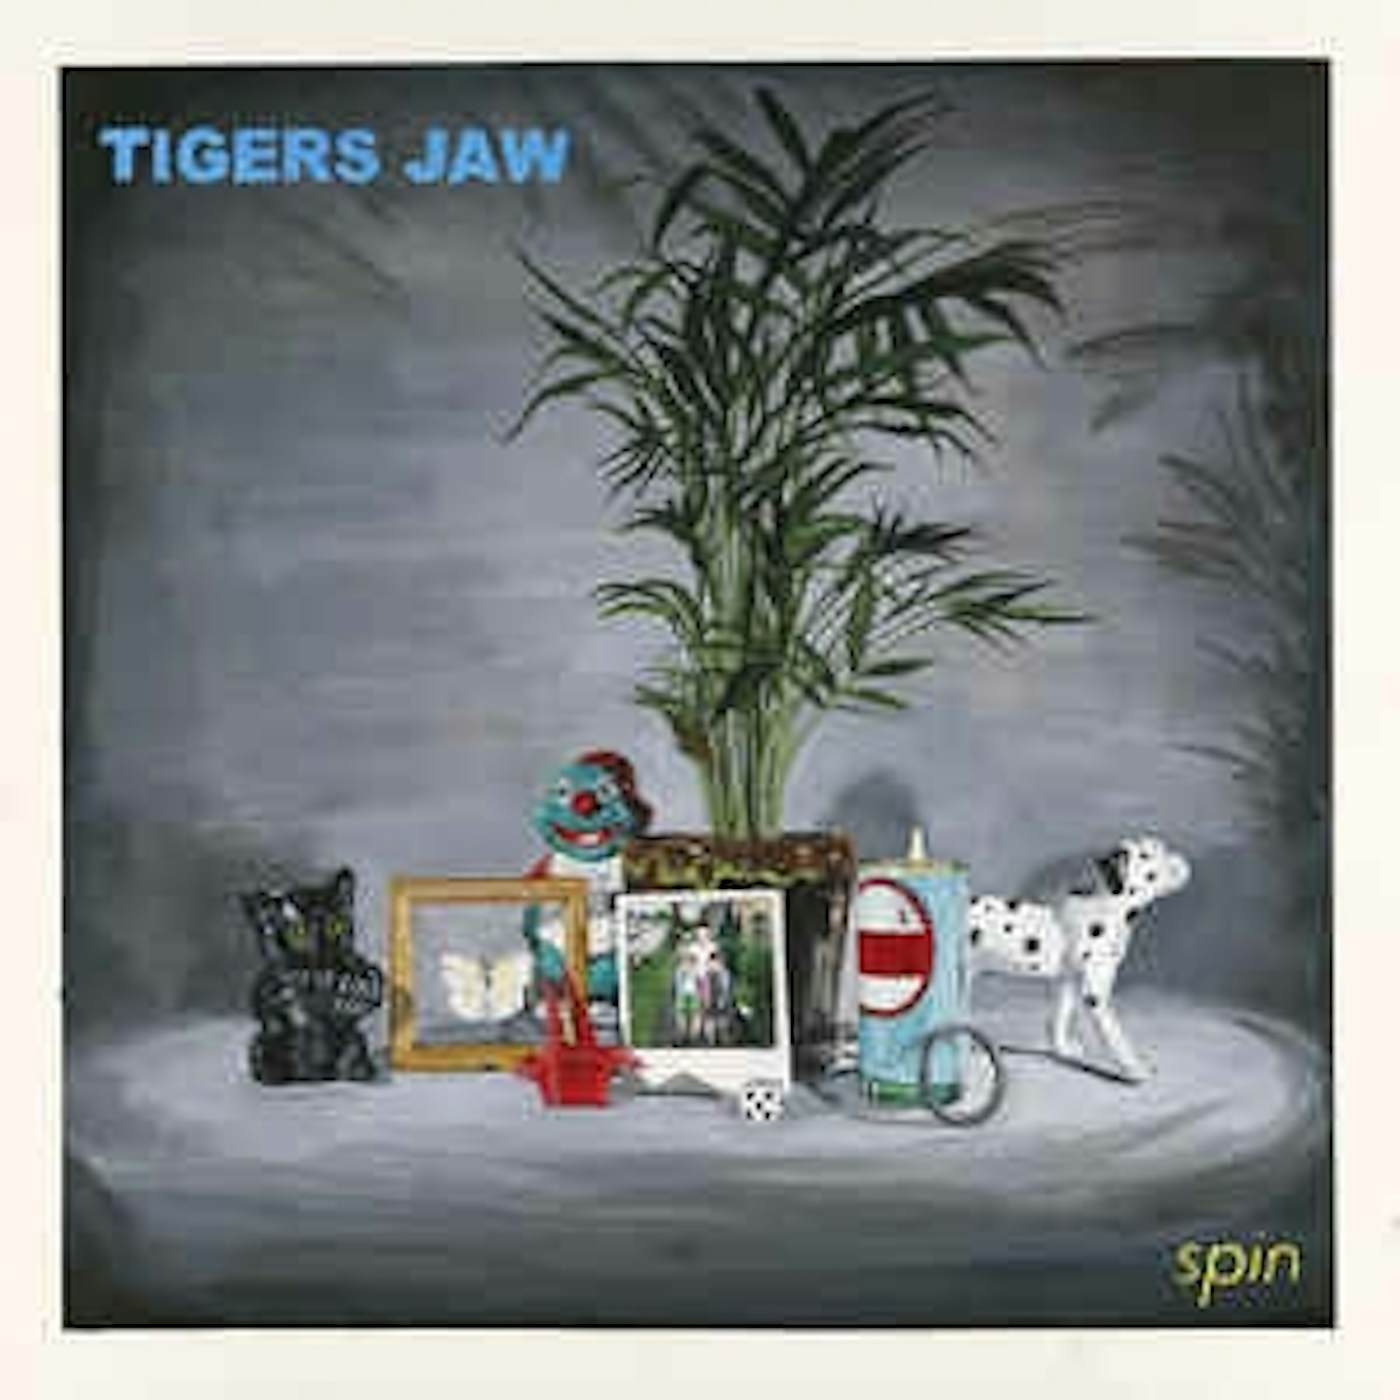 Tigers Jaw spin (Yellow Tour Vinyl)